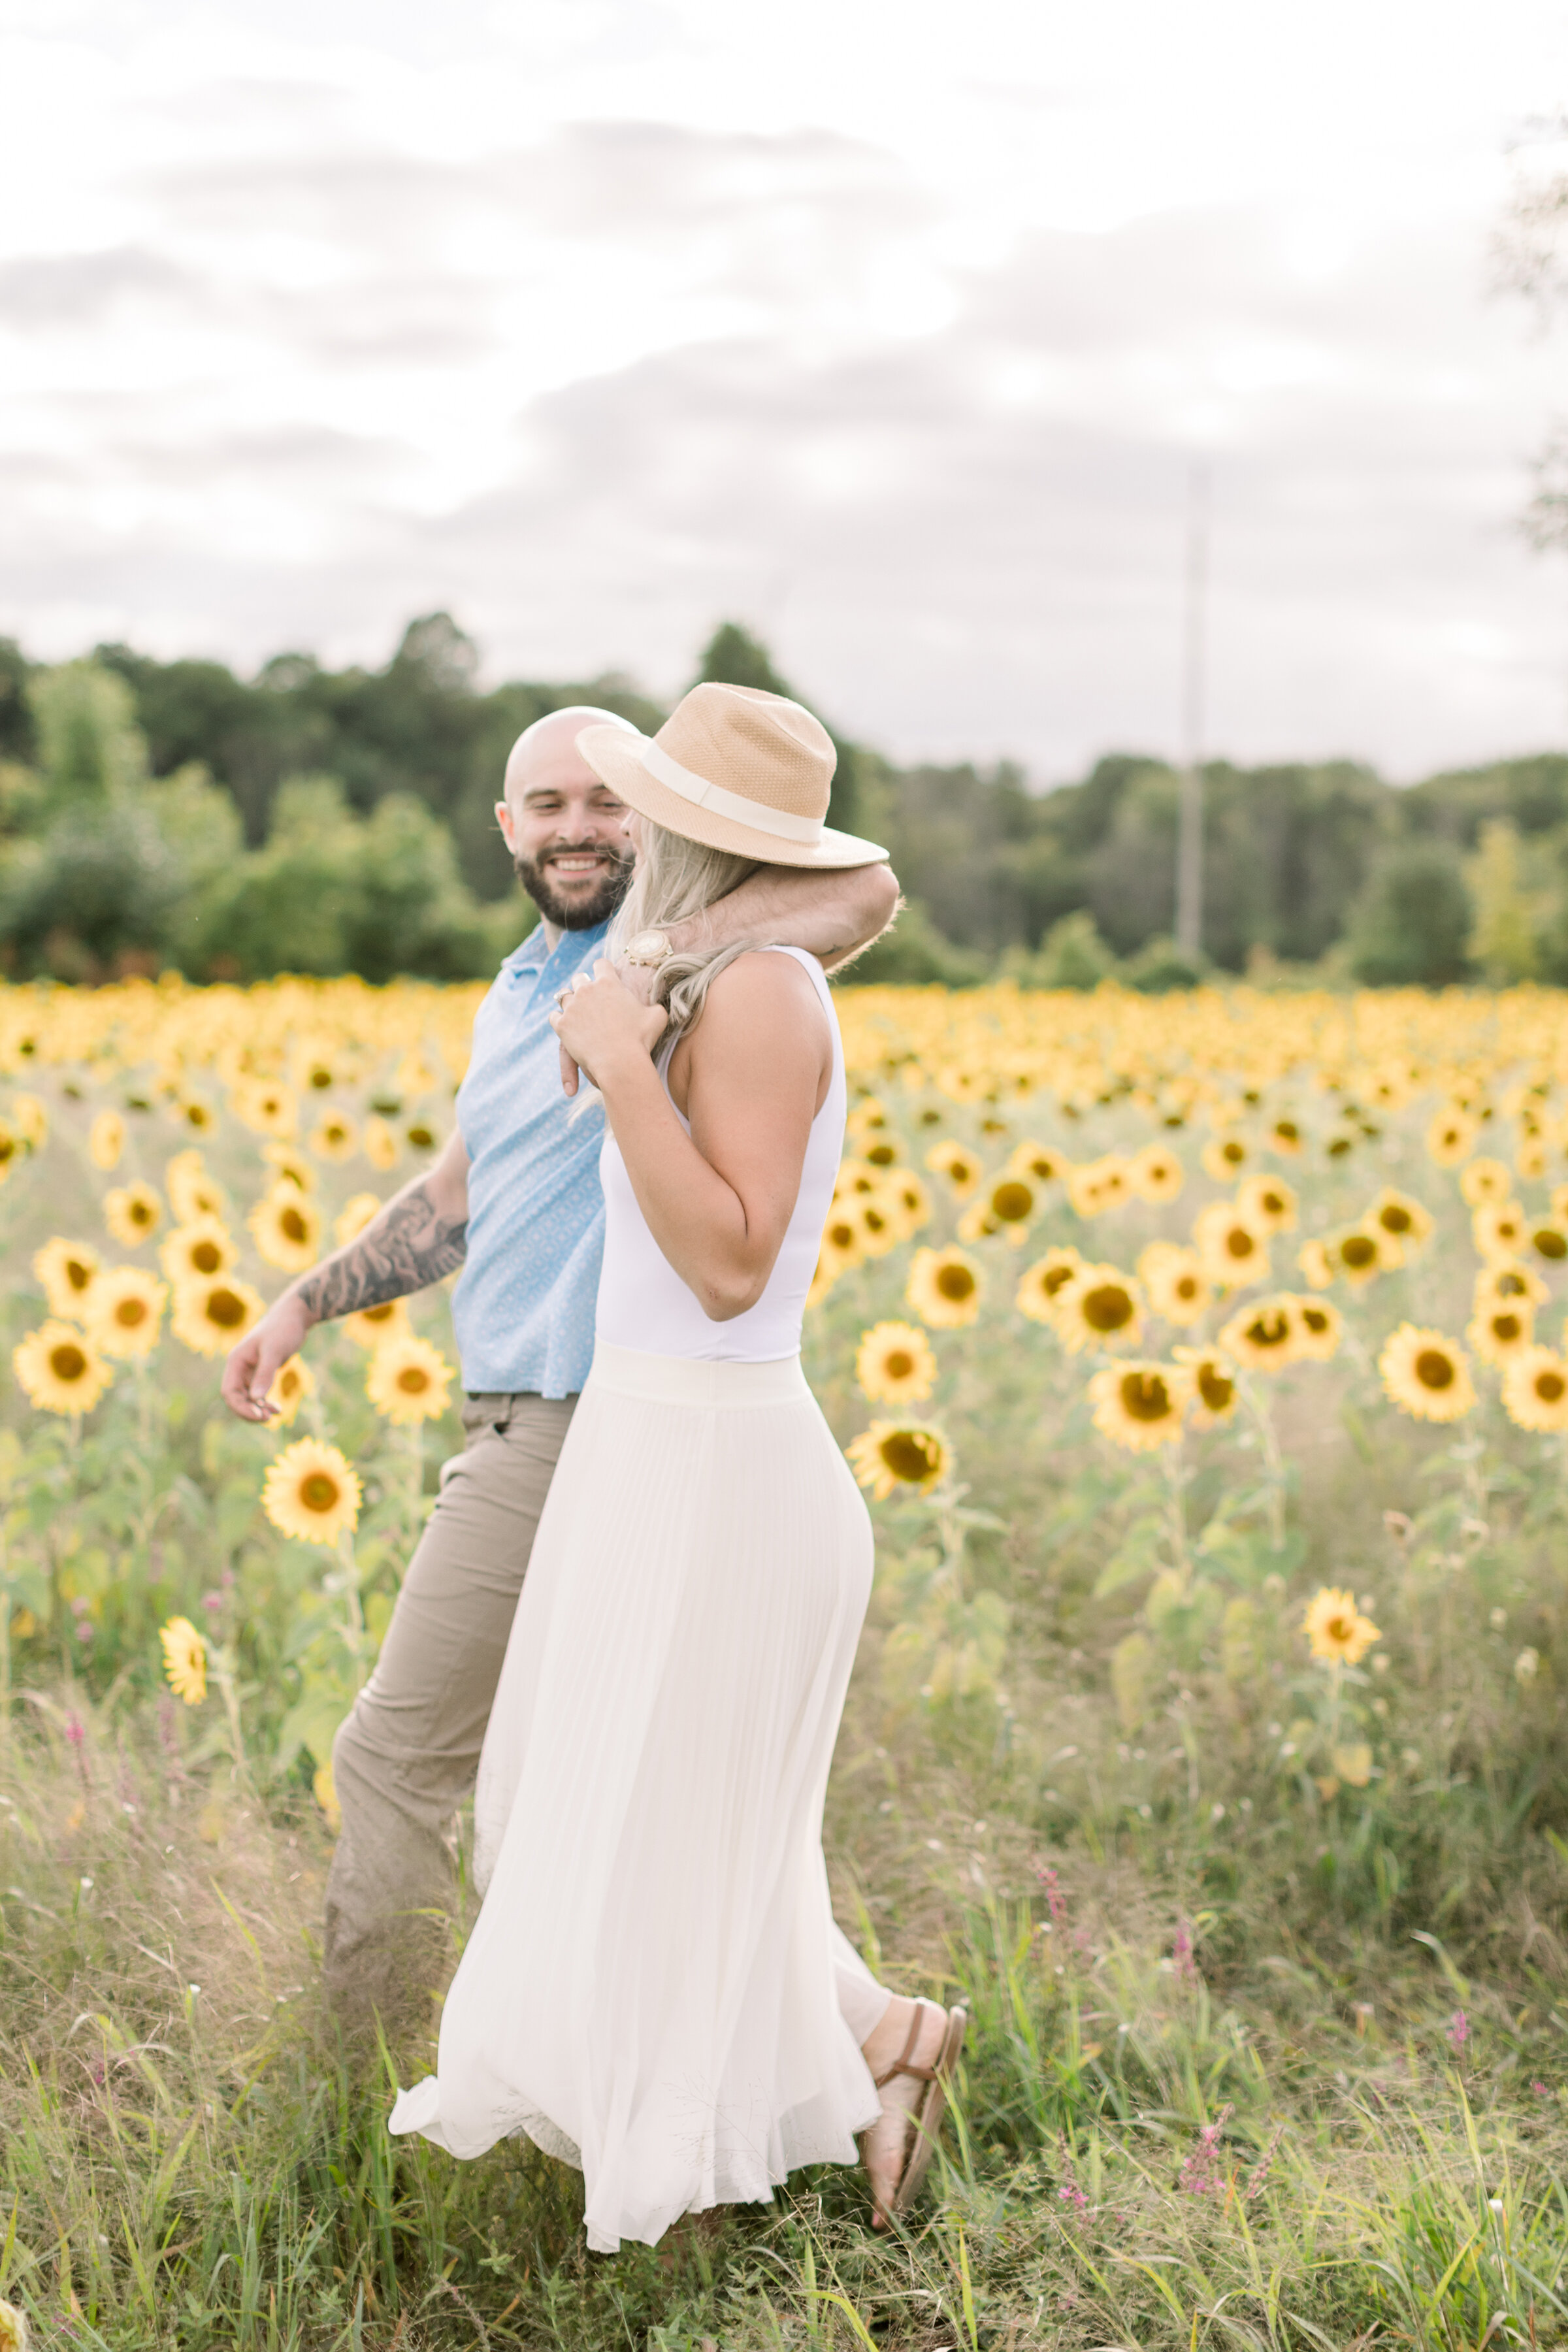  A handsome groom wraps his arm around the shoulders of his fiancé in a sunflower themed engagement session in the bright and airy Ottawa, Ontario. Professional engagement photographer Chelsea Mason Photography couple goals couple pose inspiration id